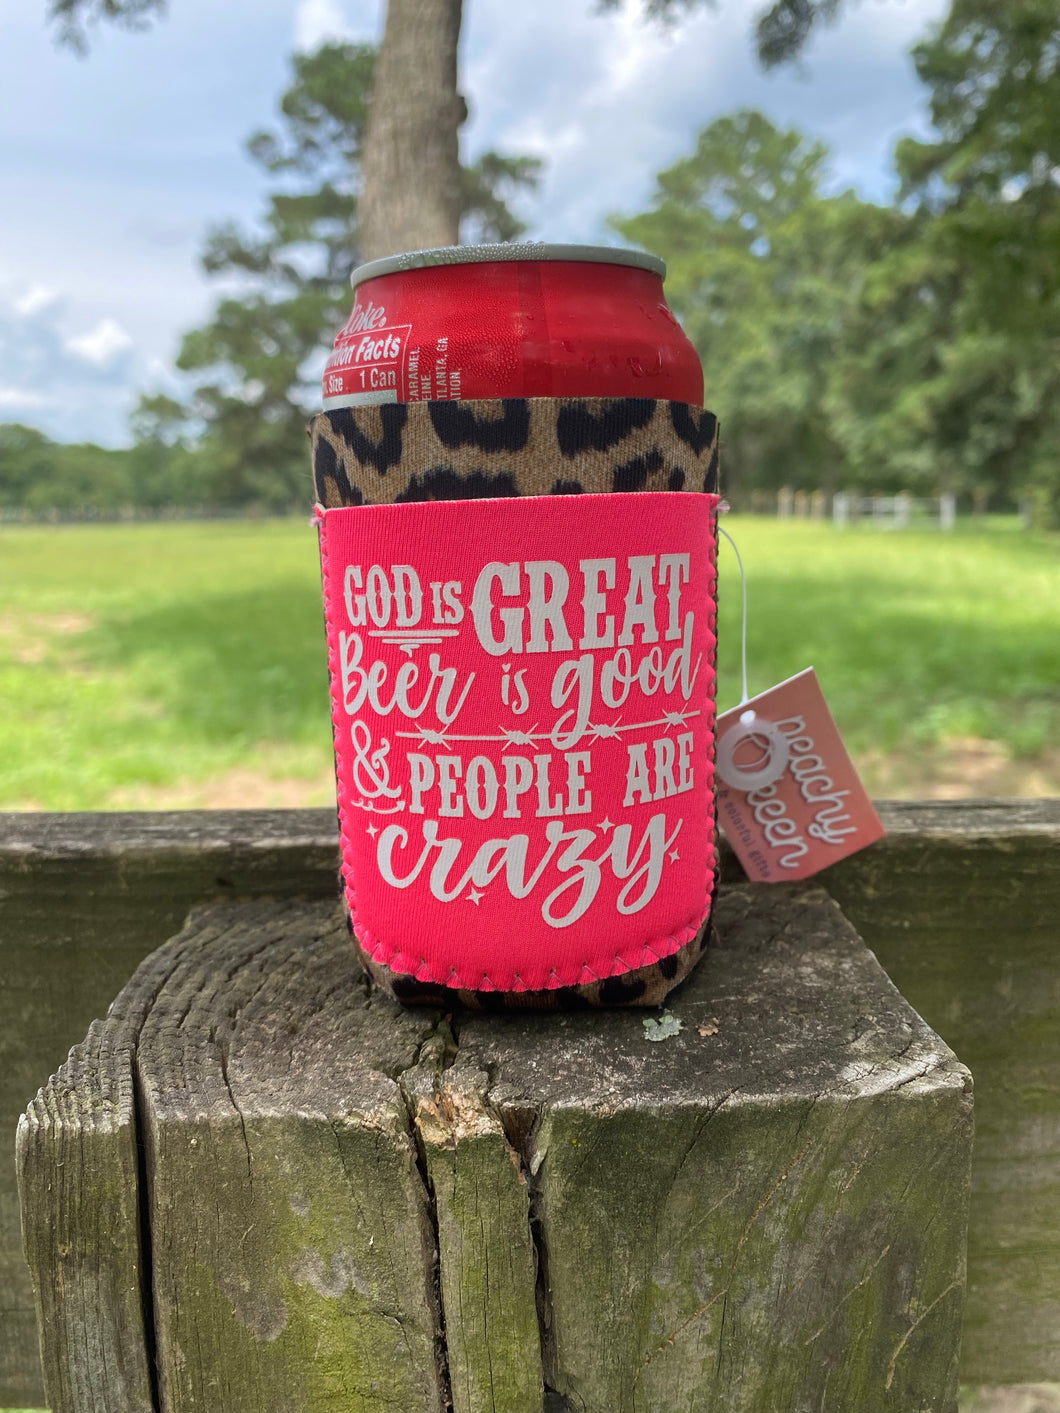 God is Great can cooler